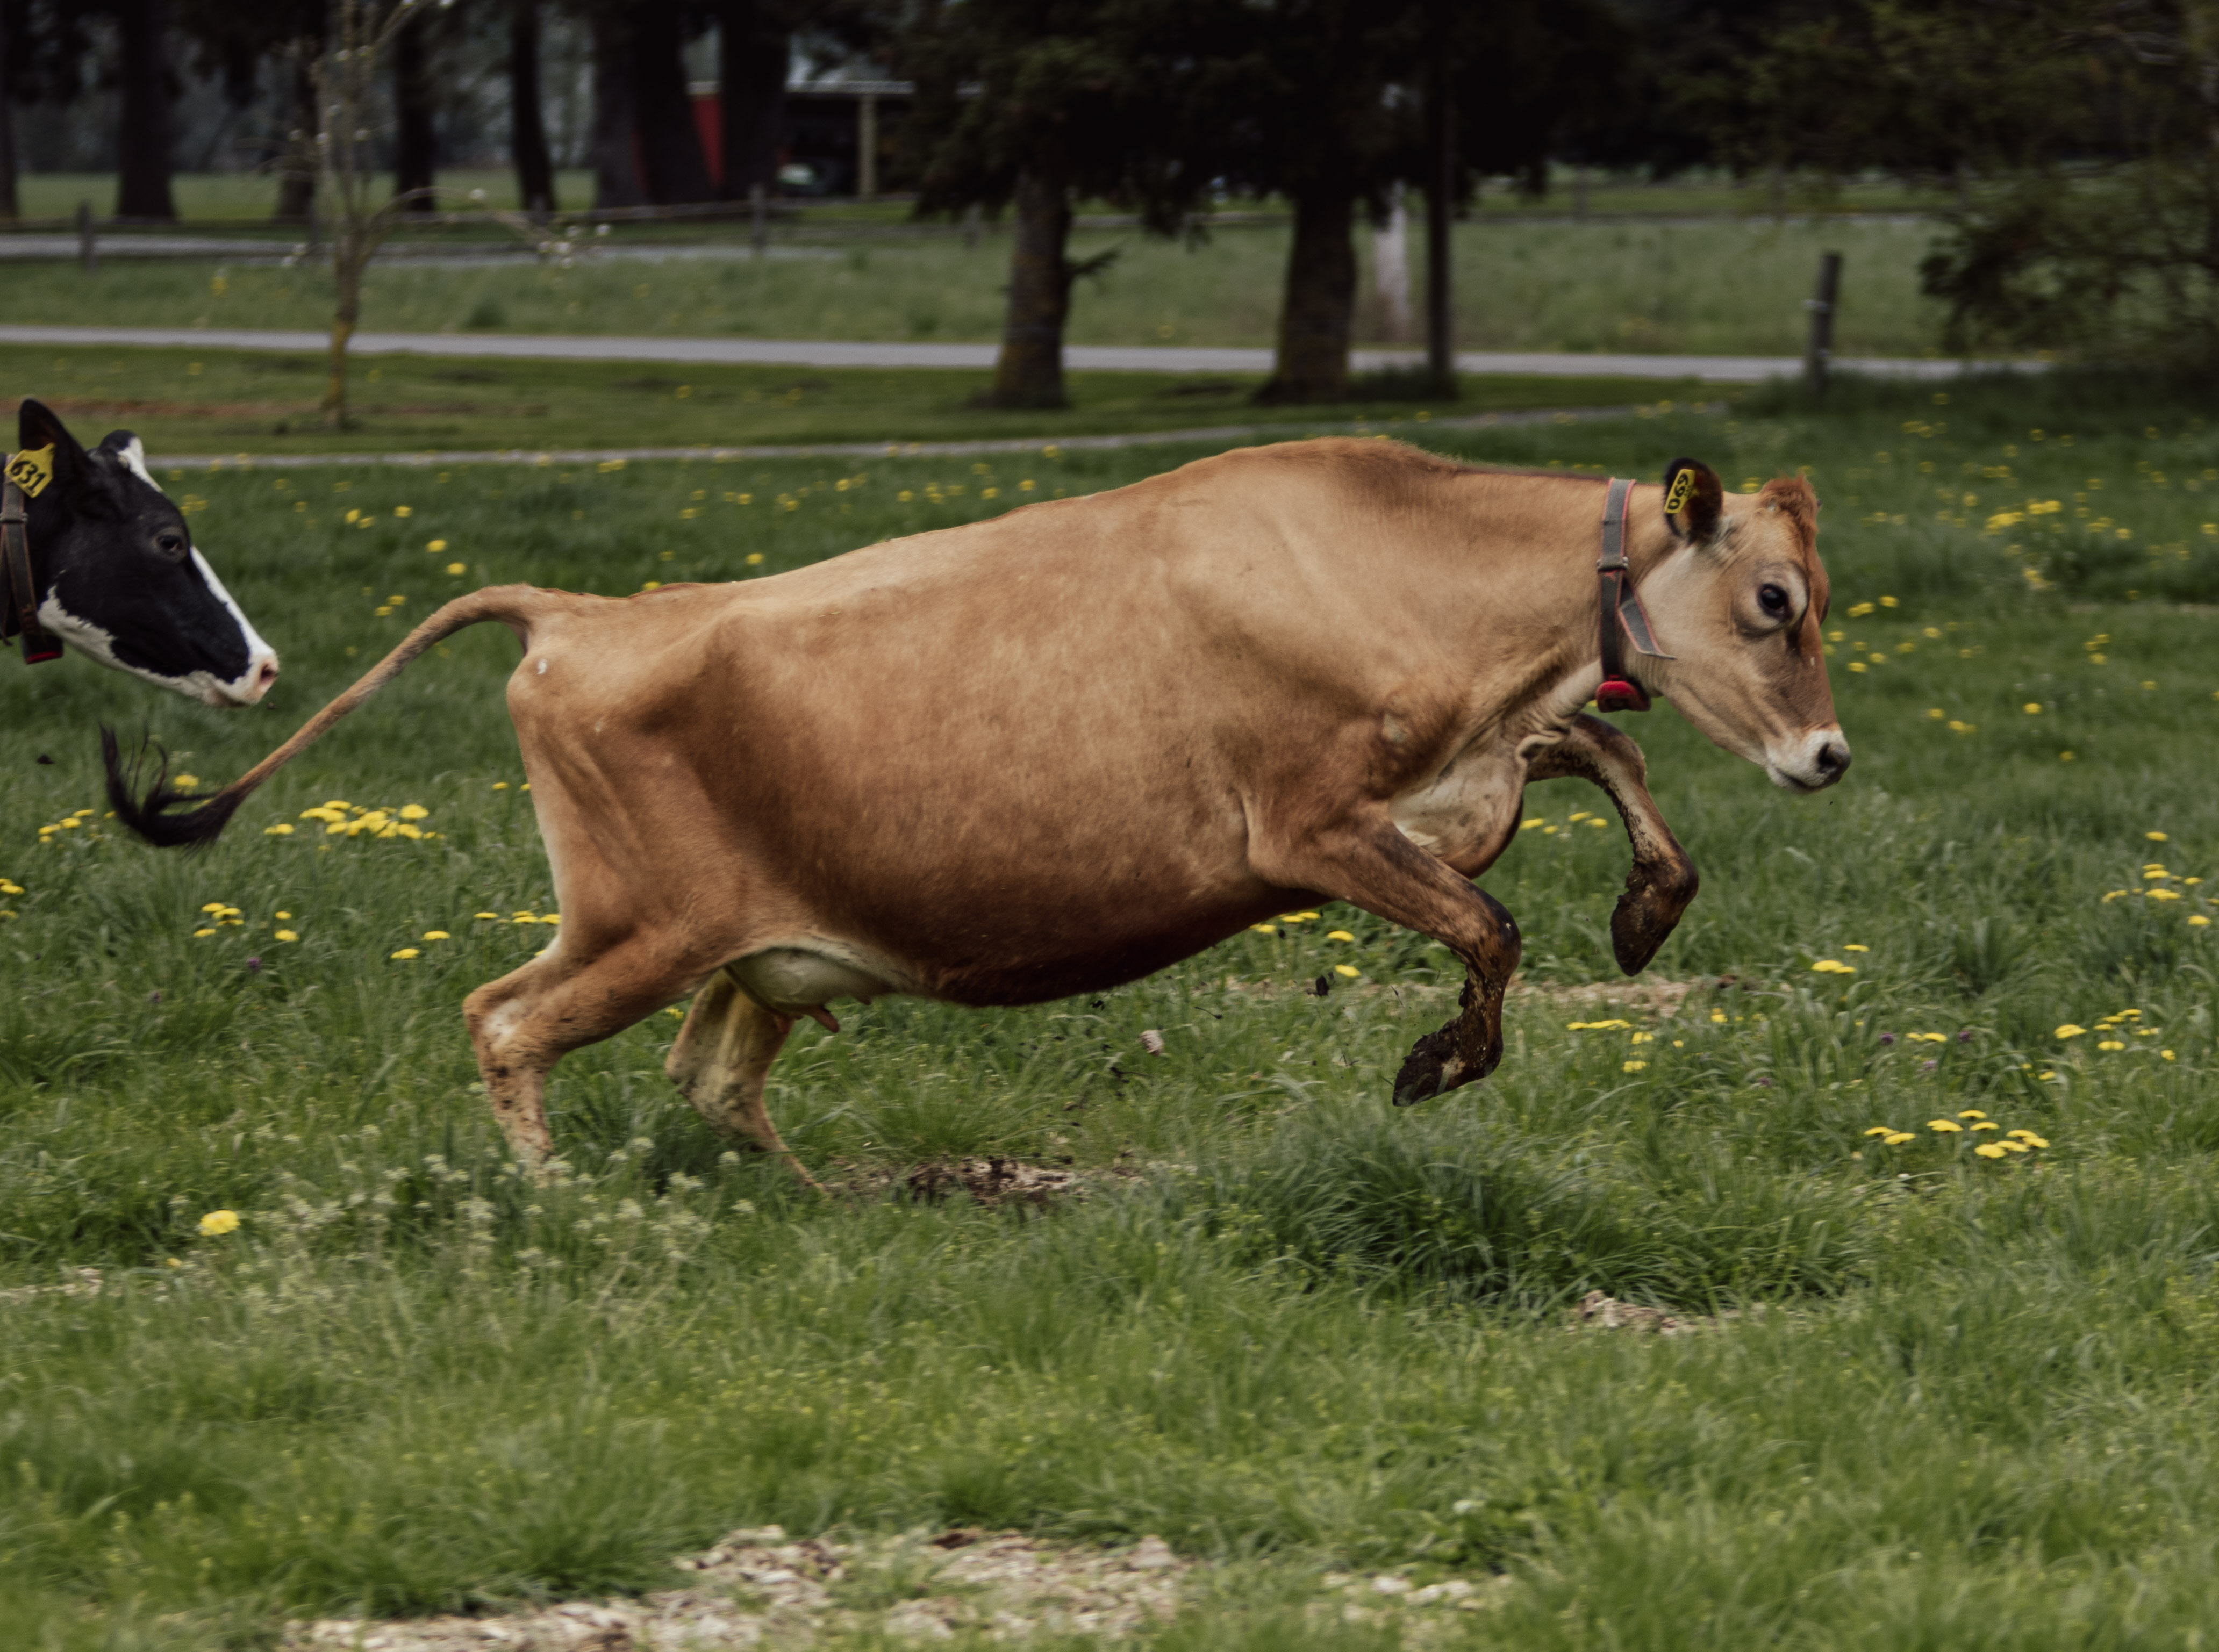 Barley, a Jersey cow, celebrating the first day on pasture last spring at Steensma Dairy & Creamery outside of Lynden, Washington.